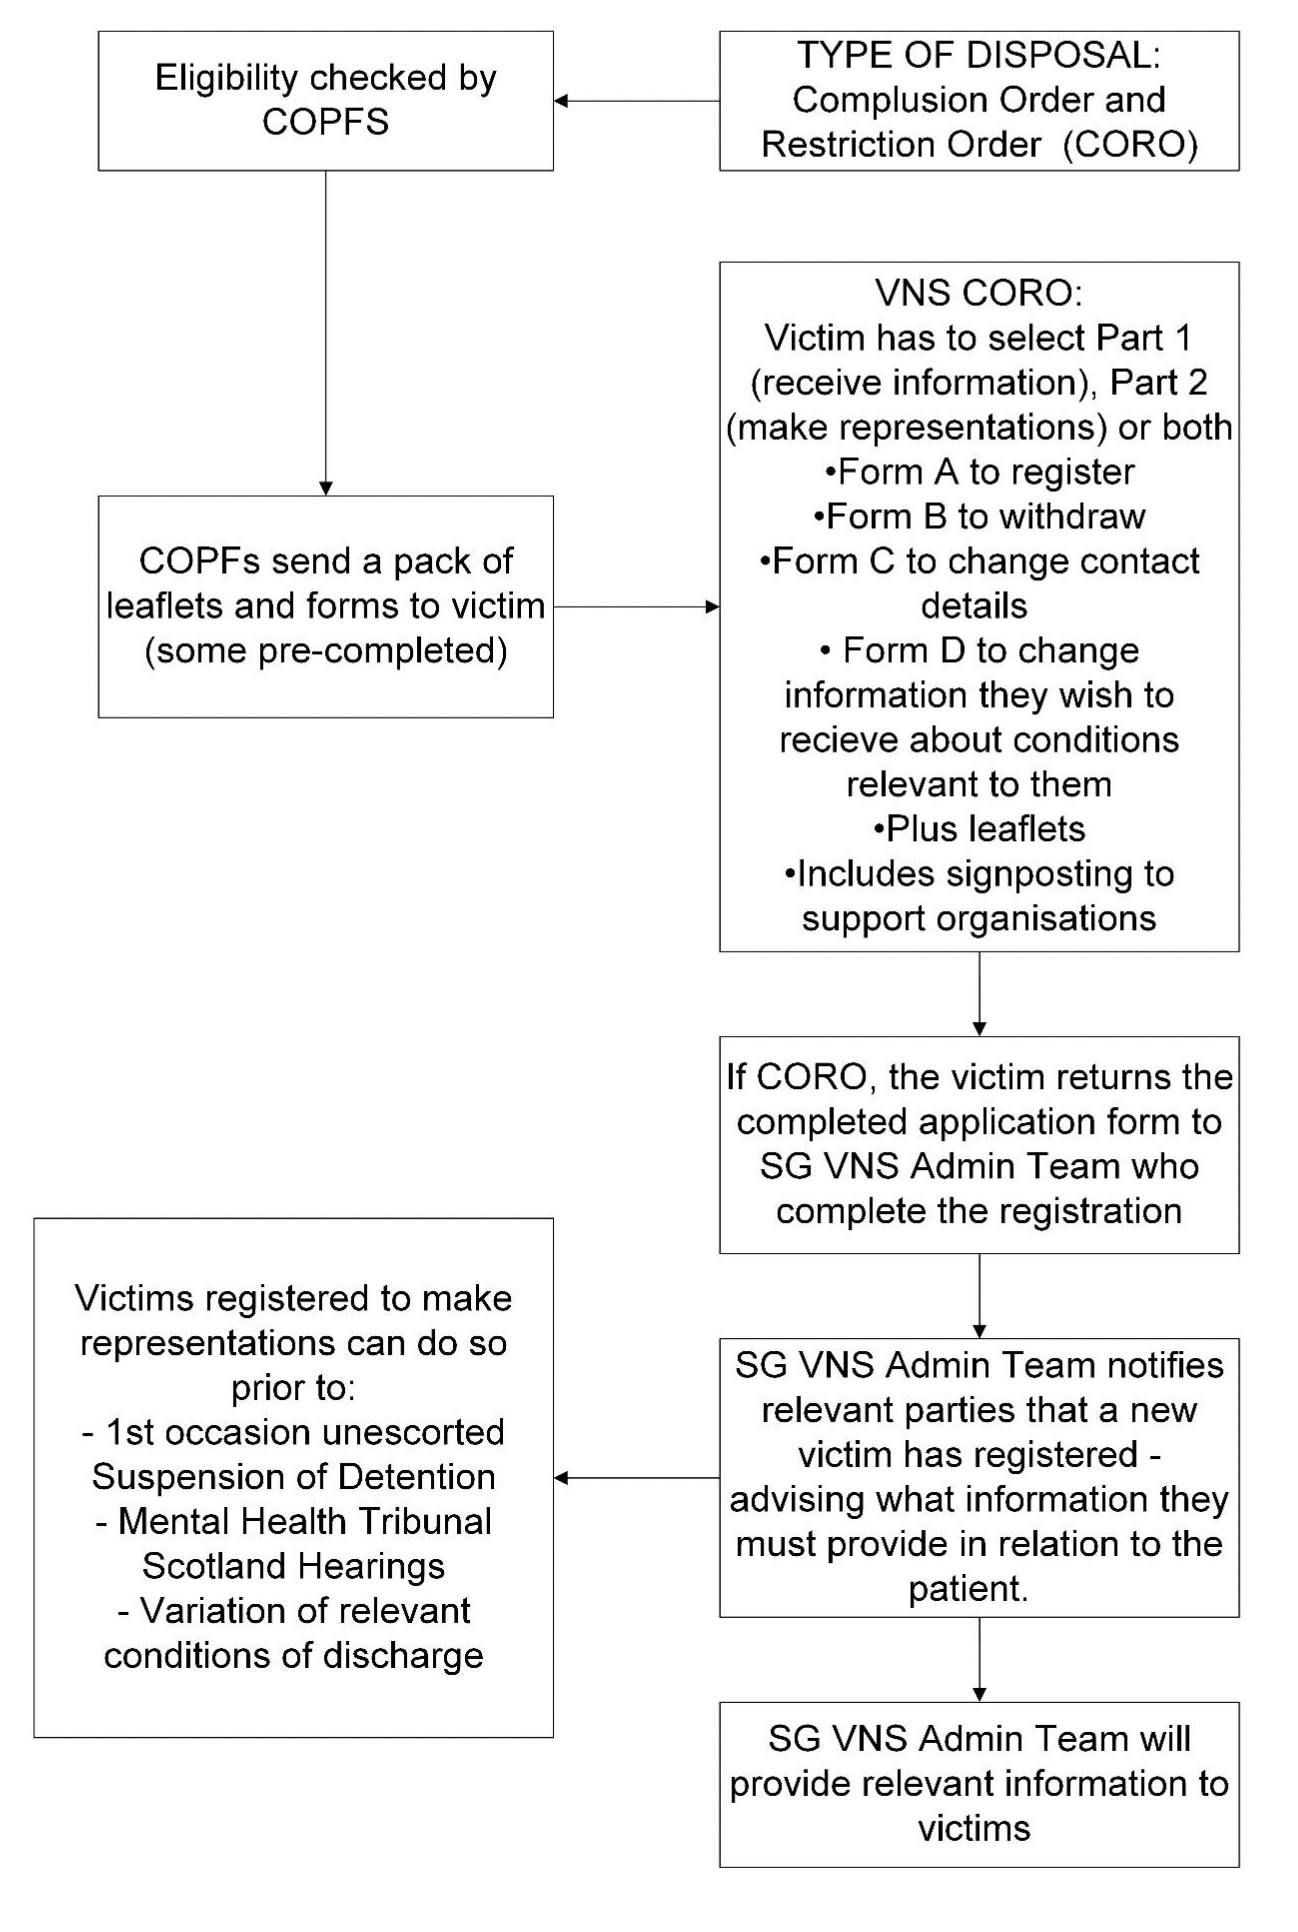 This is a process map for current victim notification where a compulsion order and restriction order (CORO) is made in relation to a person. 
After the CORO is made, COPFS checks the victim’s eligibility. They send a pack of leaflets and forms to the victim. If the victim decides to apply, they decide if they want to receive information (Part 1 of the VNS) and/or make representations (Part 2 of the VNS). 
If a CORO has been made, the victim returns the completed application form to the SG VNS Admin Team, who complete the registration. 
The SG VNS Admin Team notified relevant parties that the new victim has registered and what information they must provide in relation to the patient. 
Victims registered to make representations can do so before: 
• First occasion of unescorted Suspension of Detention
• Mental Health Tribunal Hearings
• Variation of relevant conditions of discharge 
The SG VNS Admin Team will provide the relevant information to the victim.
